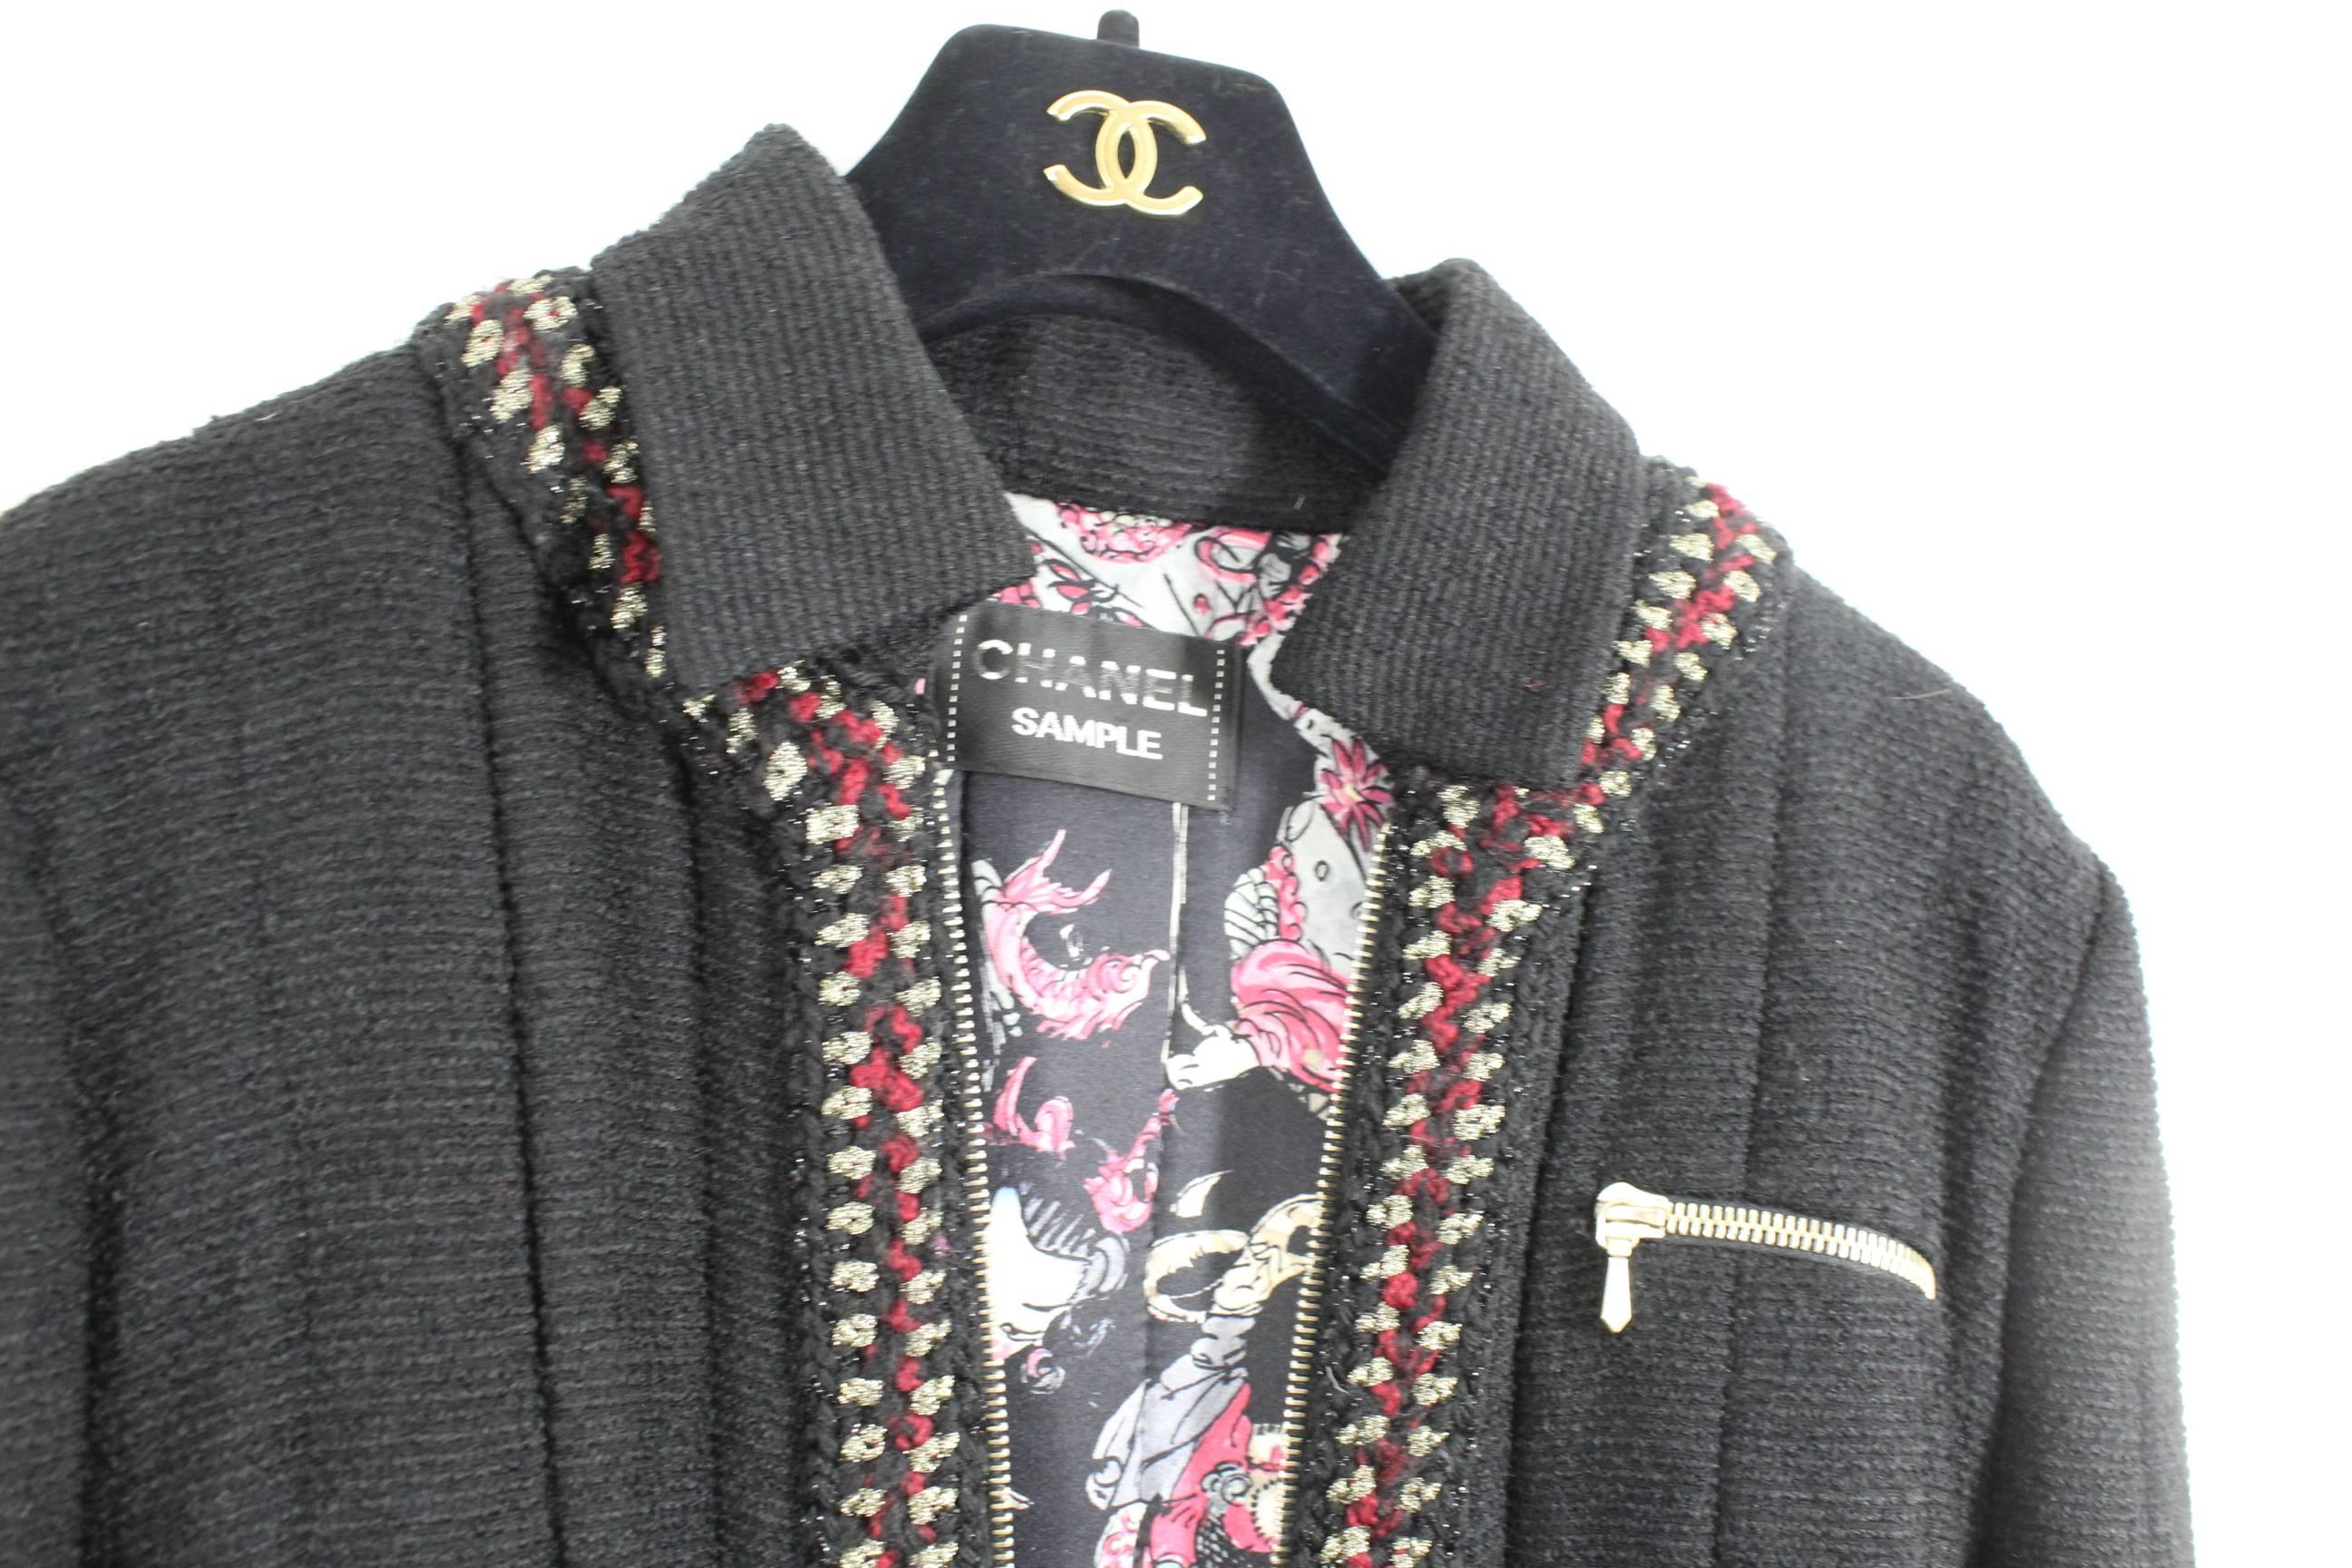 Unique coat from the Chanel collection paris Shanghai collection.

It is made in wool with a zipper and a lining with chinese figures.

good condition, the coat has been work, no major damage.

Size FR 36